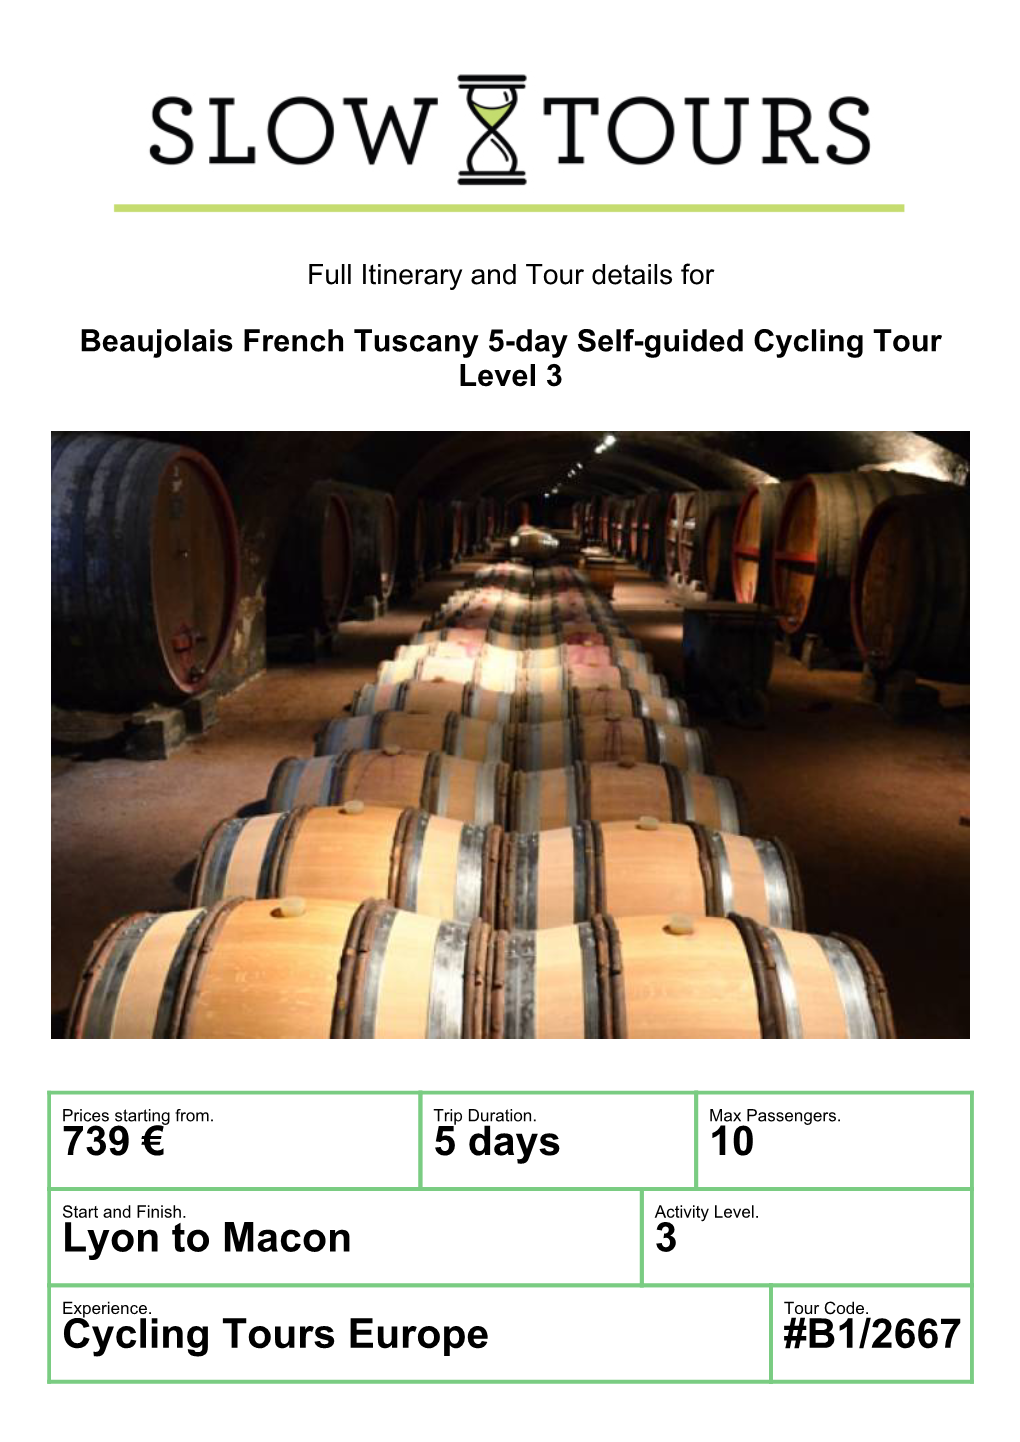 Cycling Tours Europe #B1/2667 Beaujolais French Tuscany 5-Day Self-Guided Cycling Tour Level 3